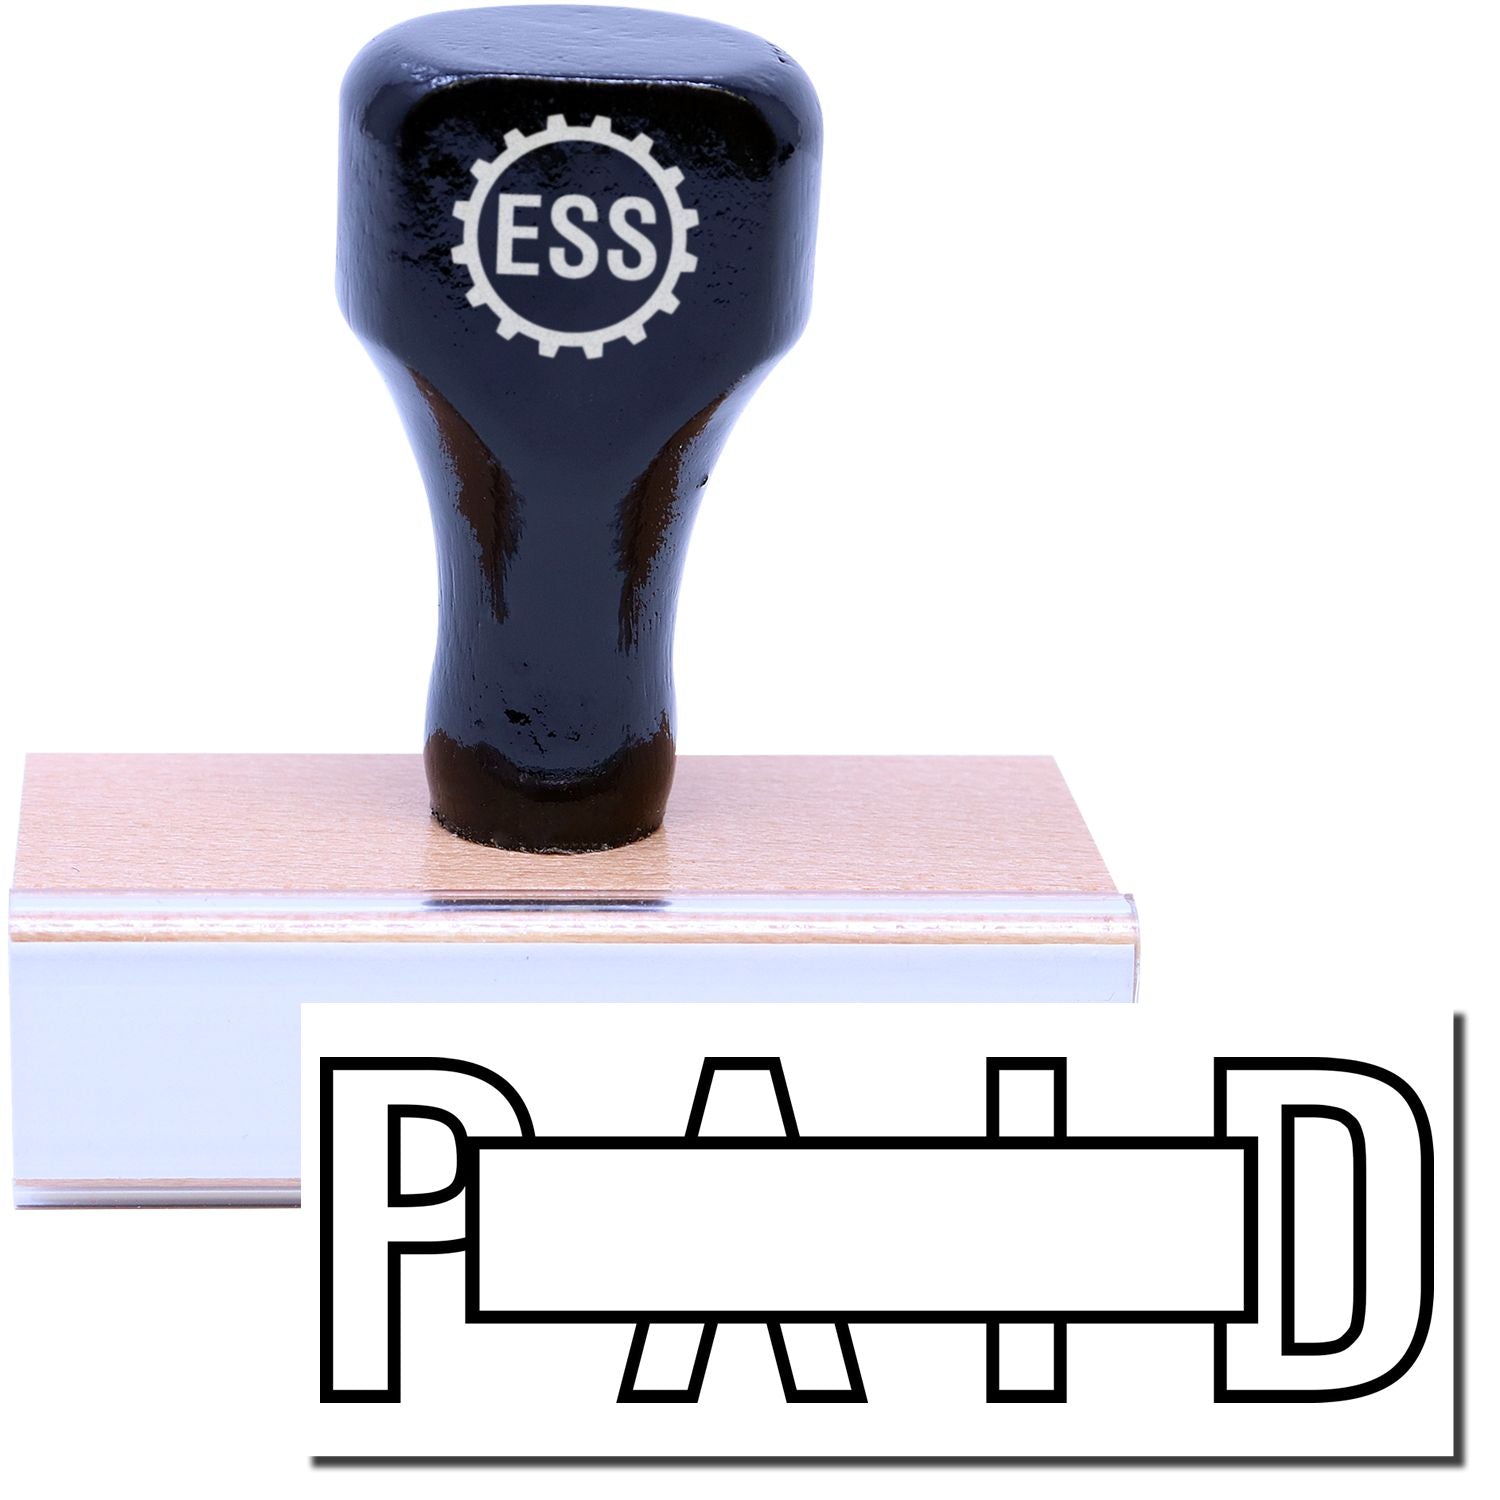 A stock office rubber stamp with a stamped image showing how the text "PAID" in an outline font with a box in the center of the text is displayed after stamping.